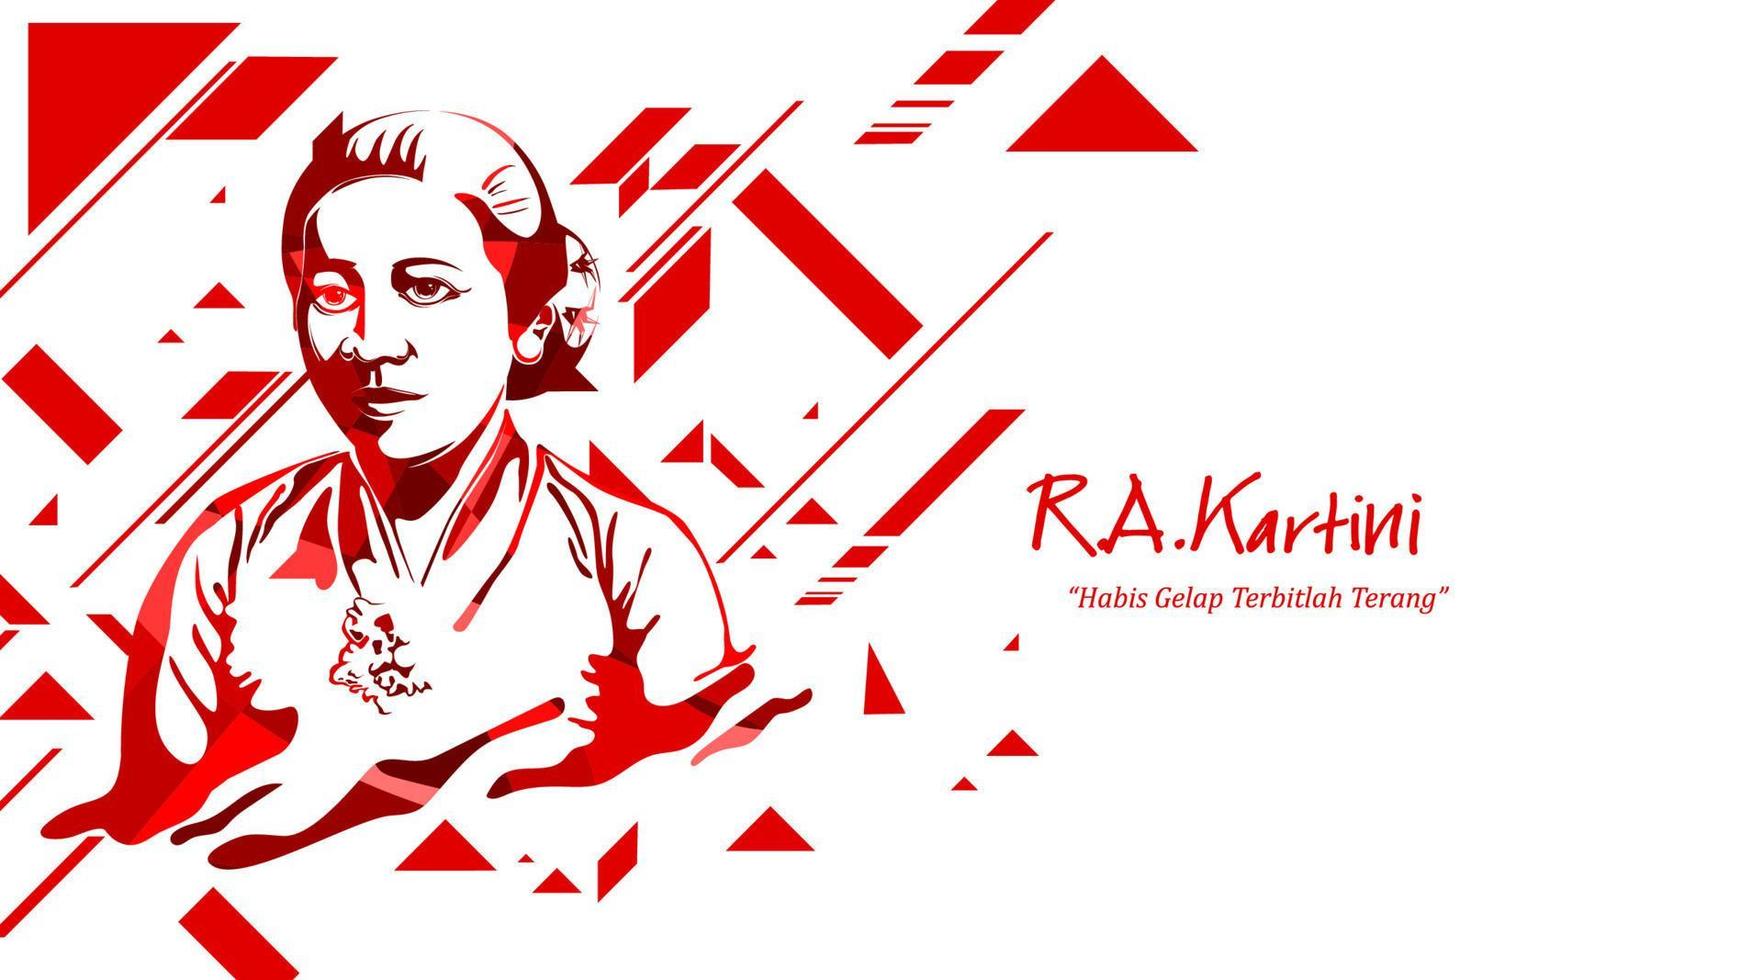 Raden Adjeng Kartini the heroes of women and human right in Indonesia with abstract futuristic triangle concept background. - Vector